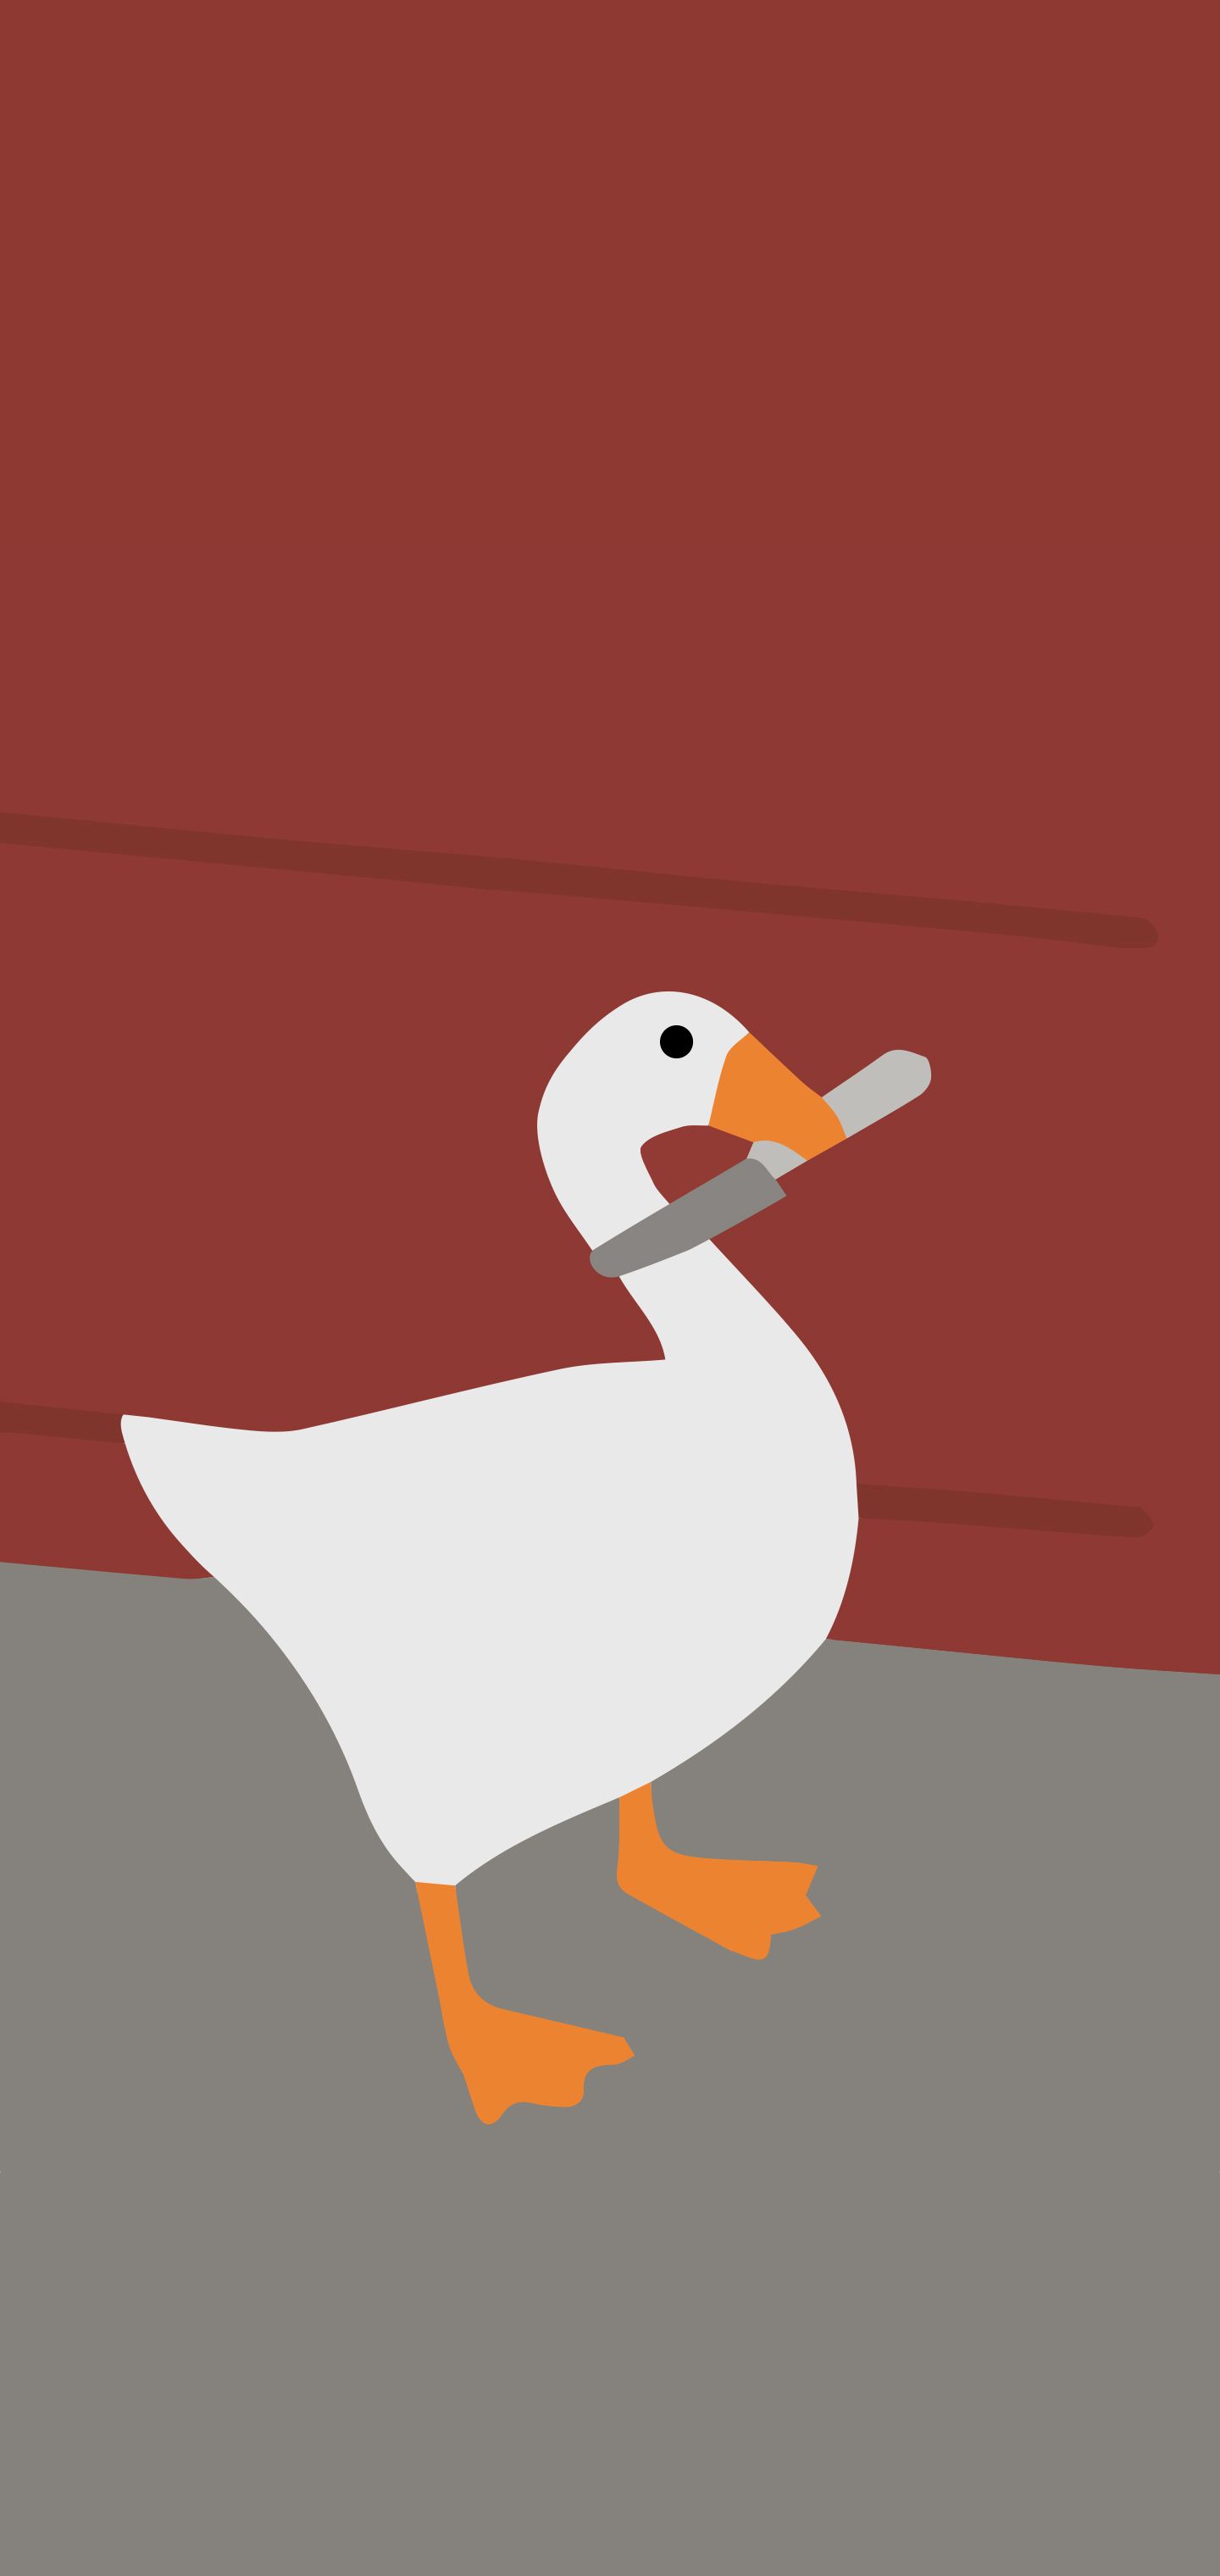 A high res, armed goose for phone wallpaper everywhere